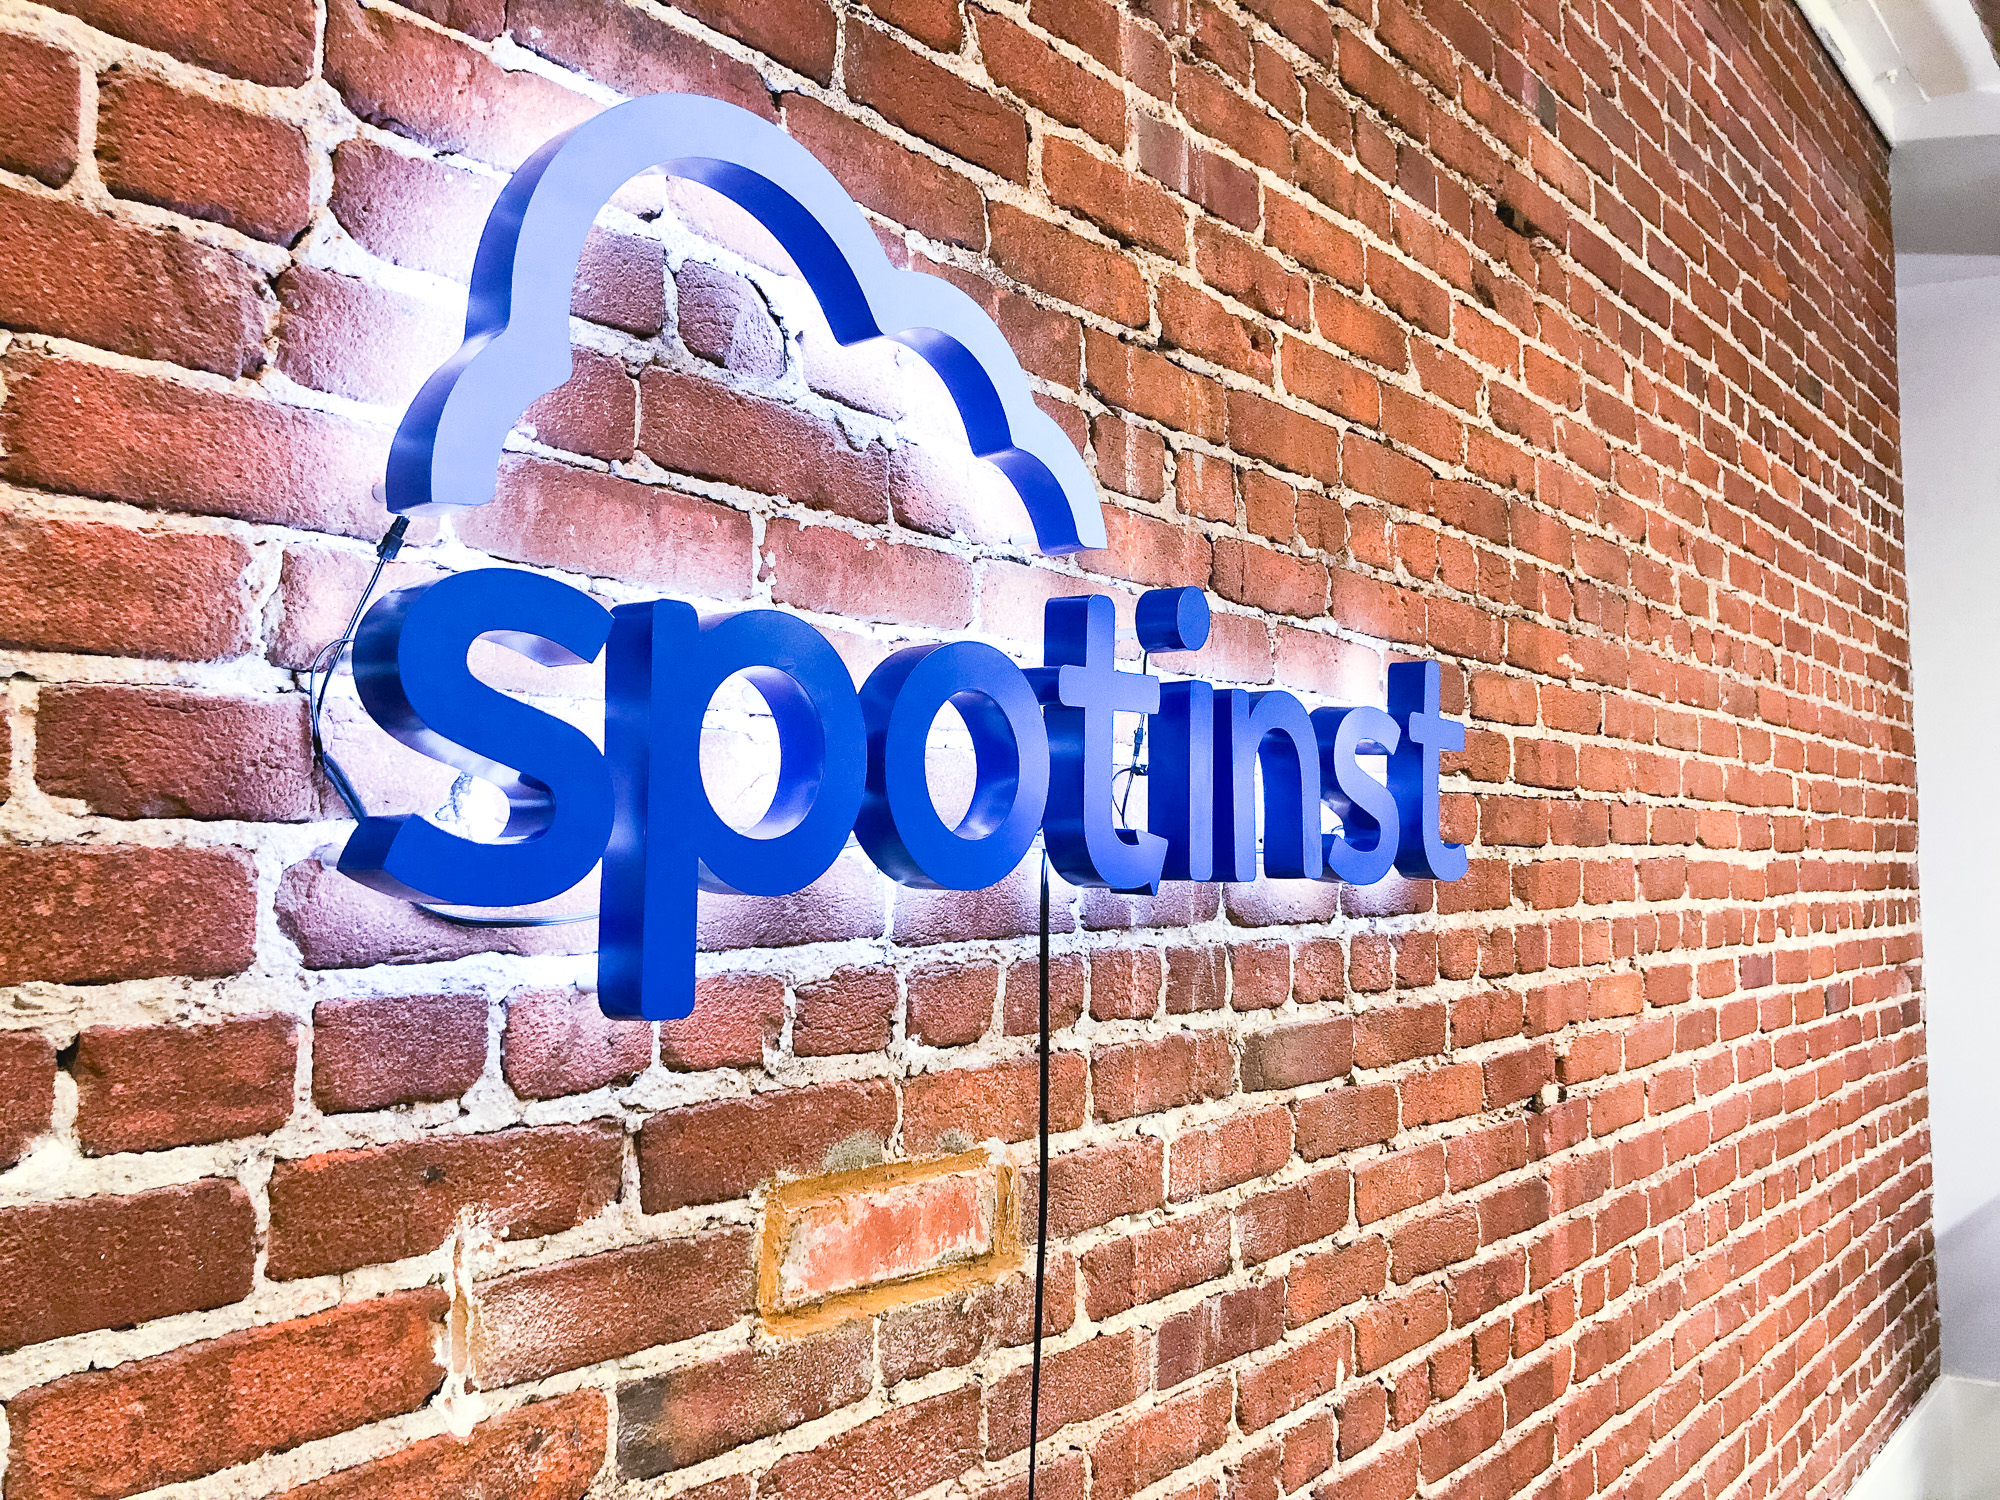 Illuminated, painted blue sign on brick conference room wall for Spotinst, a San Francisco company that creates intelligent workload software.